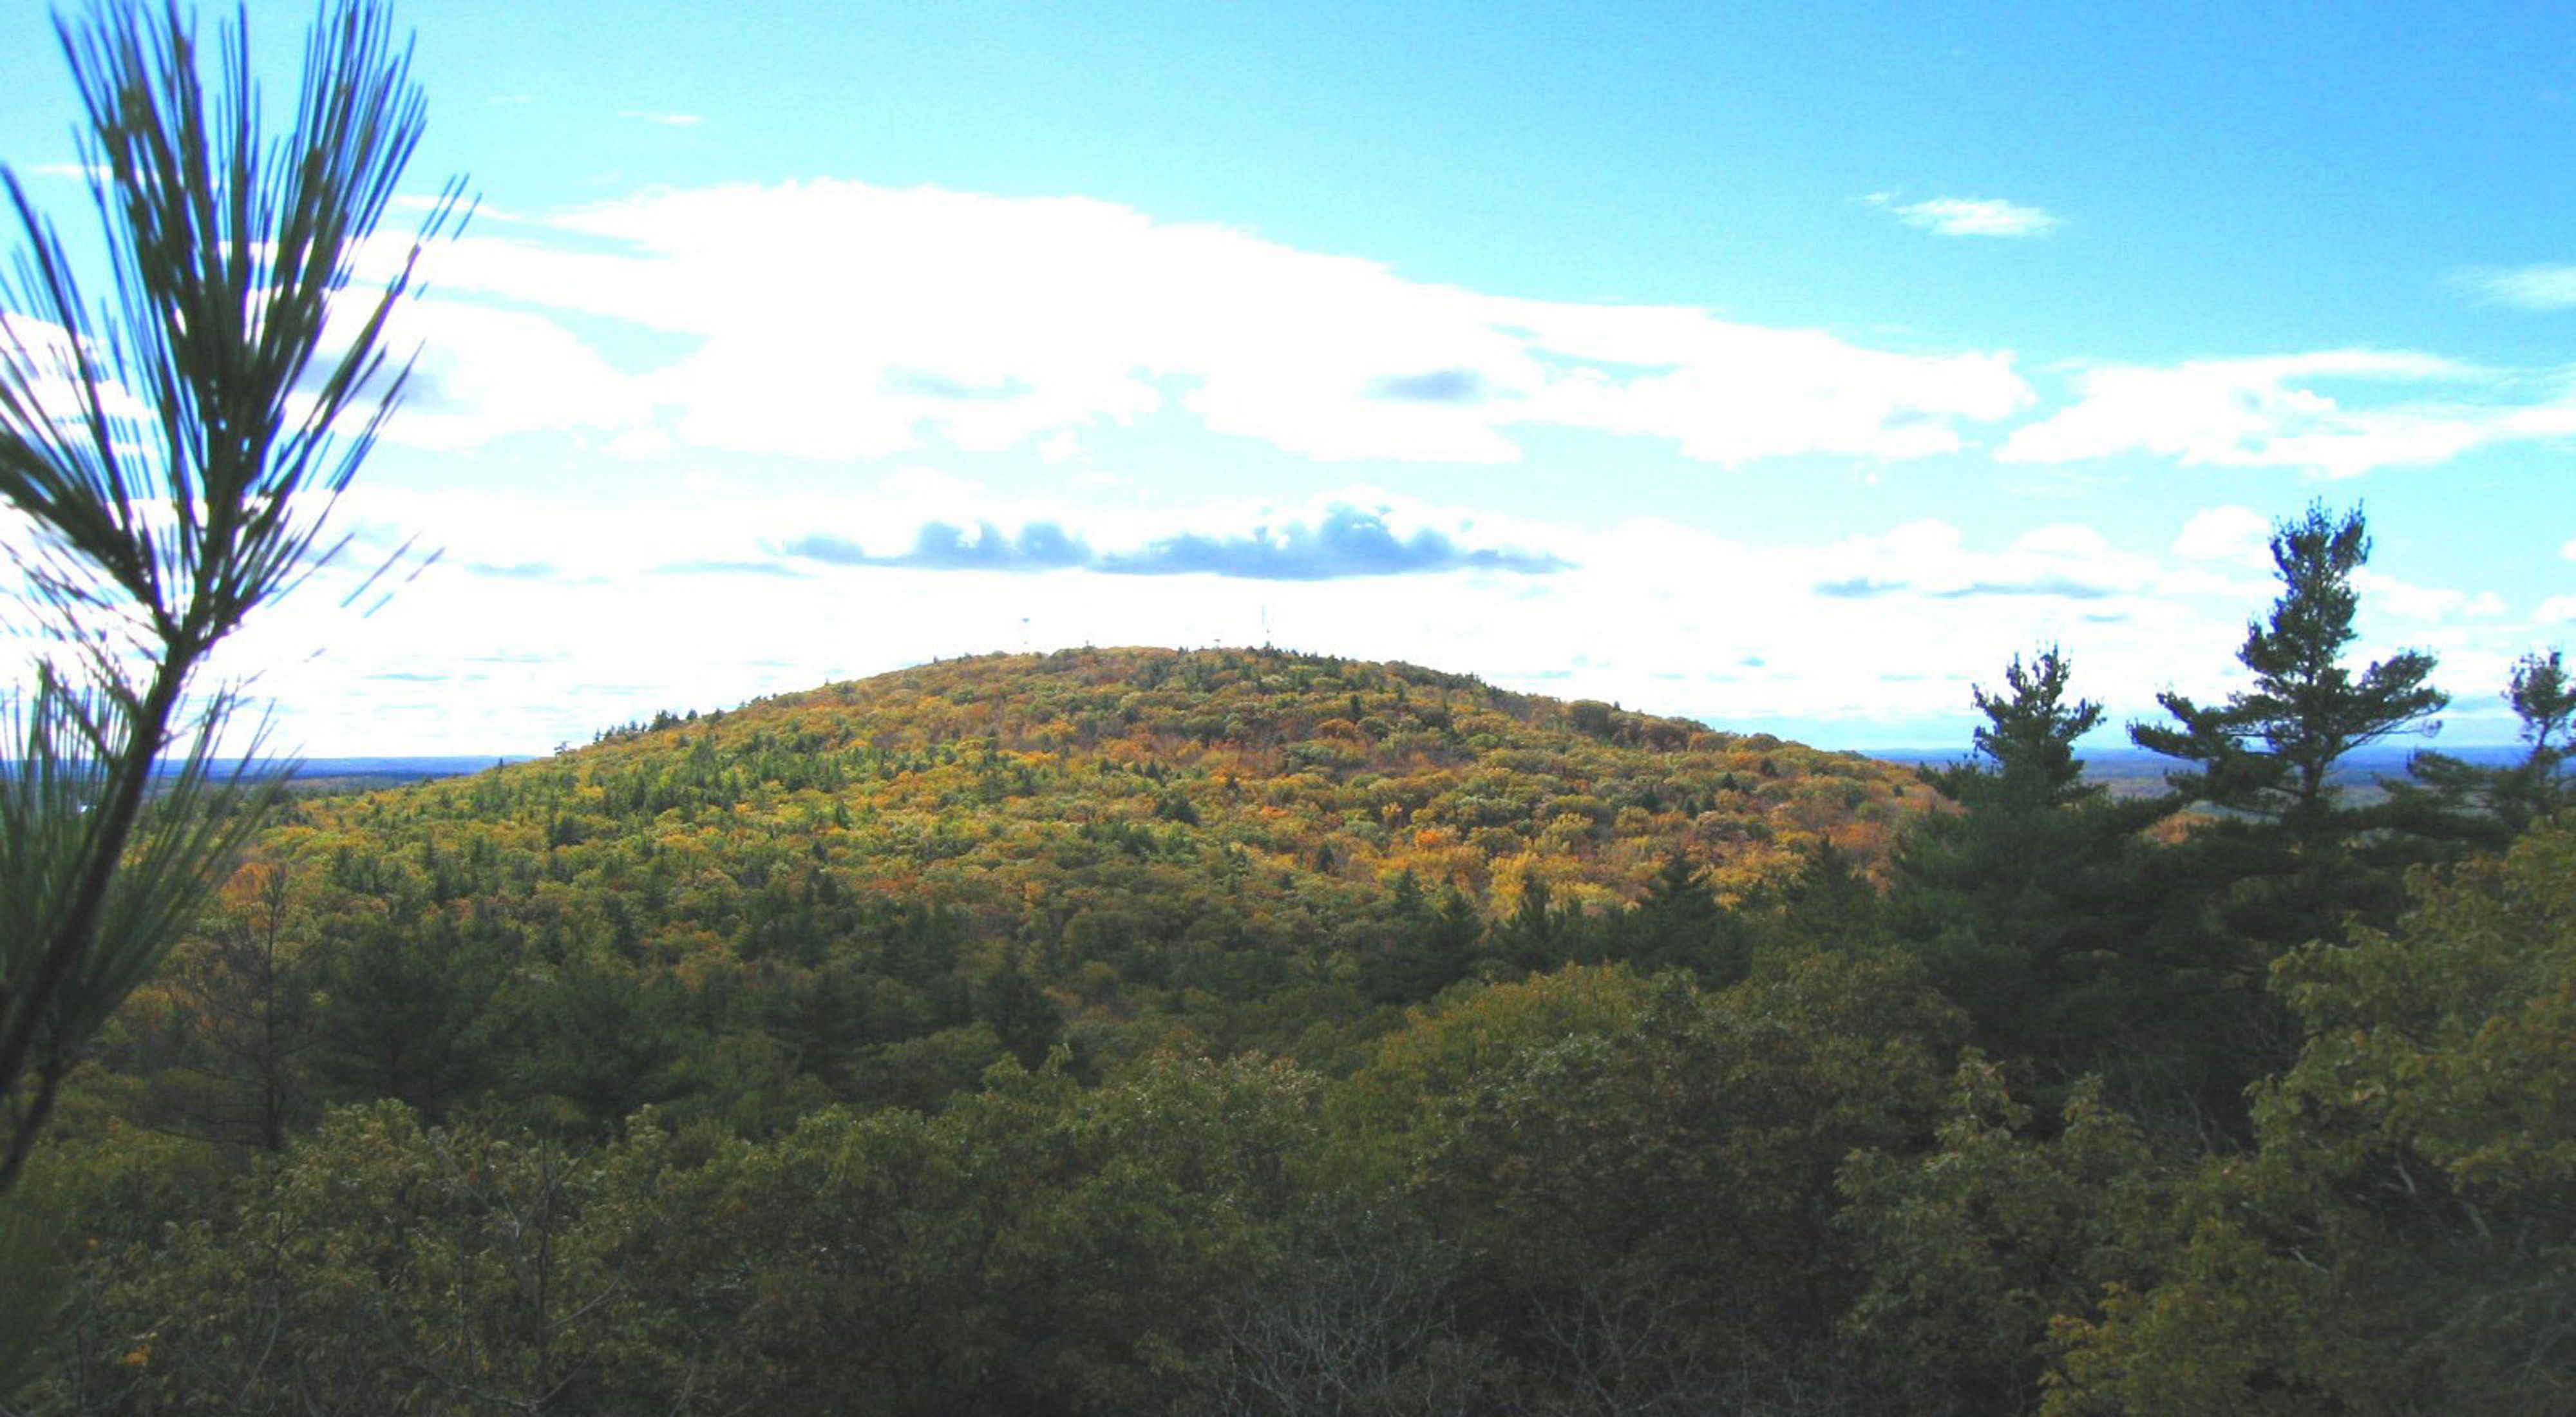 View looking out over a mountain covered in autumn-colored forests.